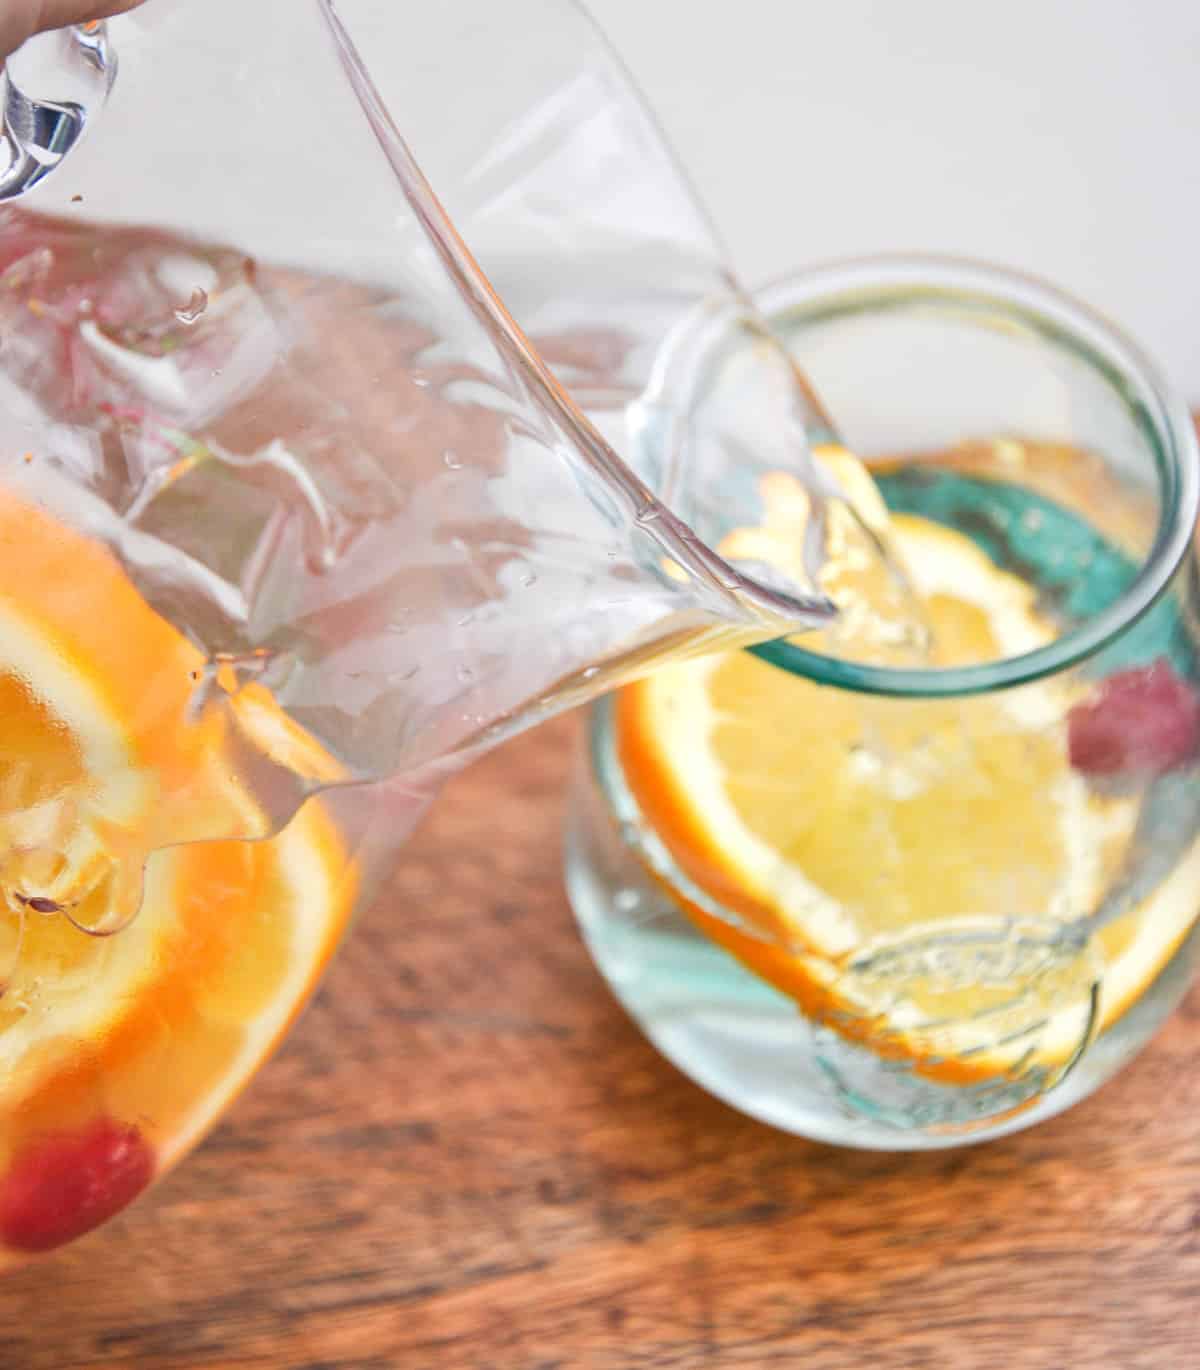 Pour pitcher of detox water into glass